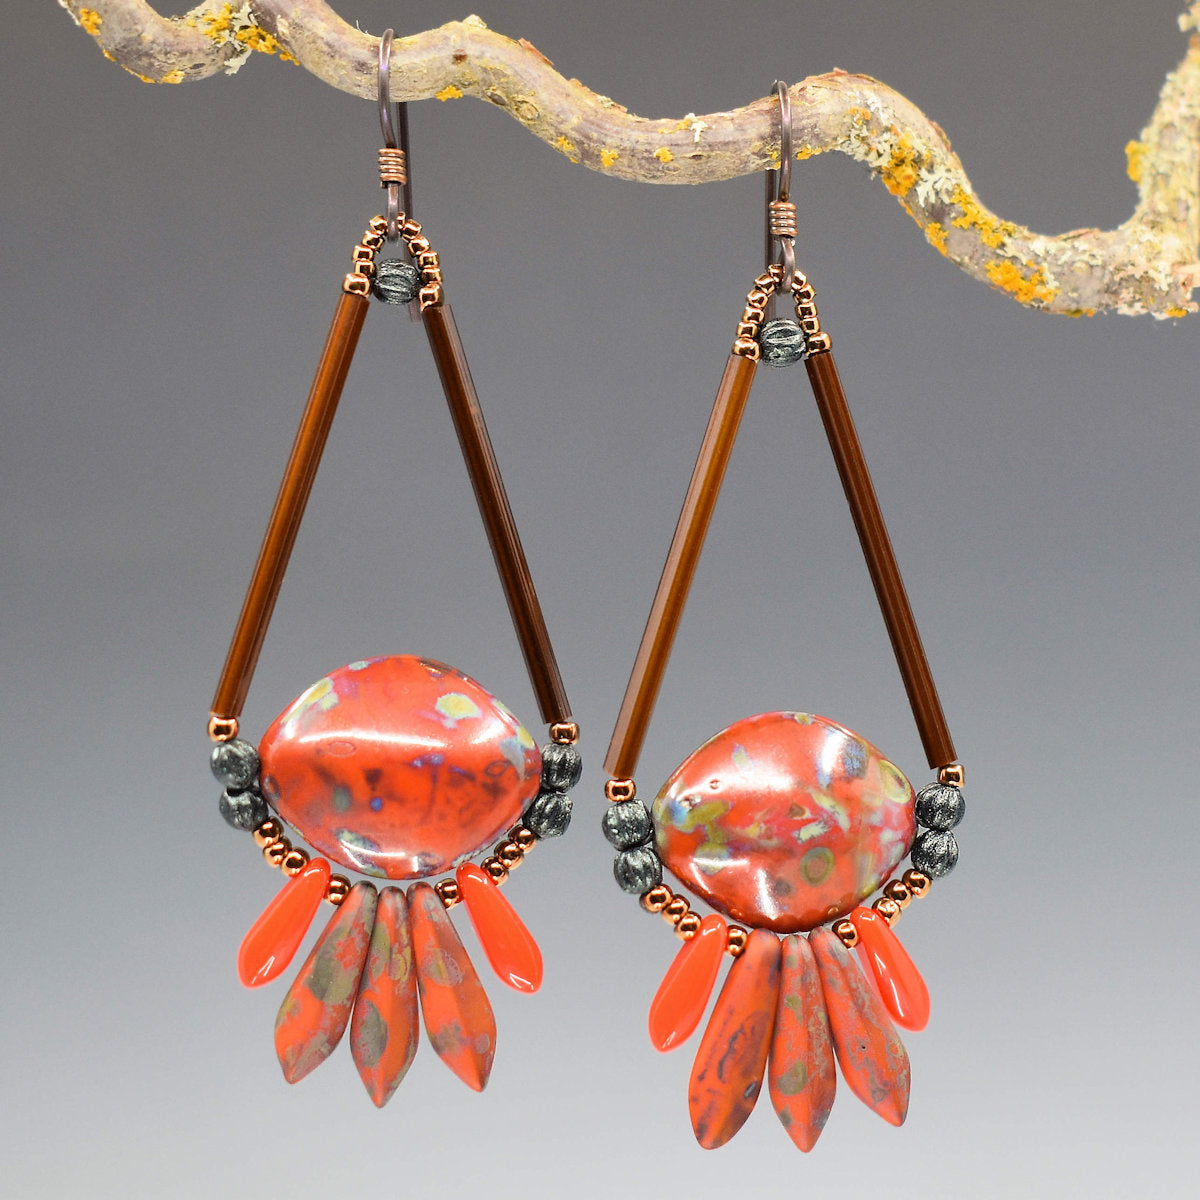 Warm red earrings hang from a lichen covered twig. The earrings are shaped like a teardrop, with long brown tube beads forming the upper sides and a warm red pointy ended oval bead with brown speckles forms the bottom. Below the teardrop shape there is a swag of red dagger beads; the inner three are larger with brown speckles and the outer are smaller and glossy. 